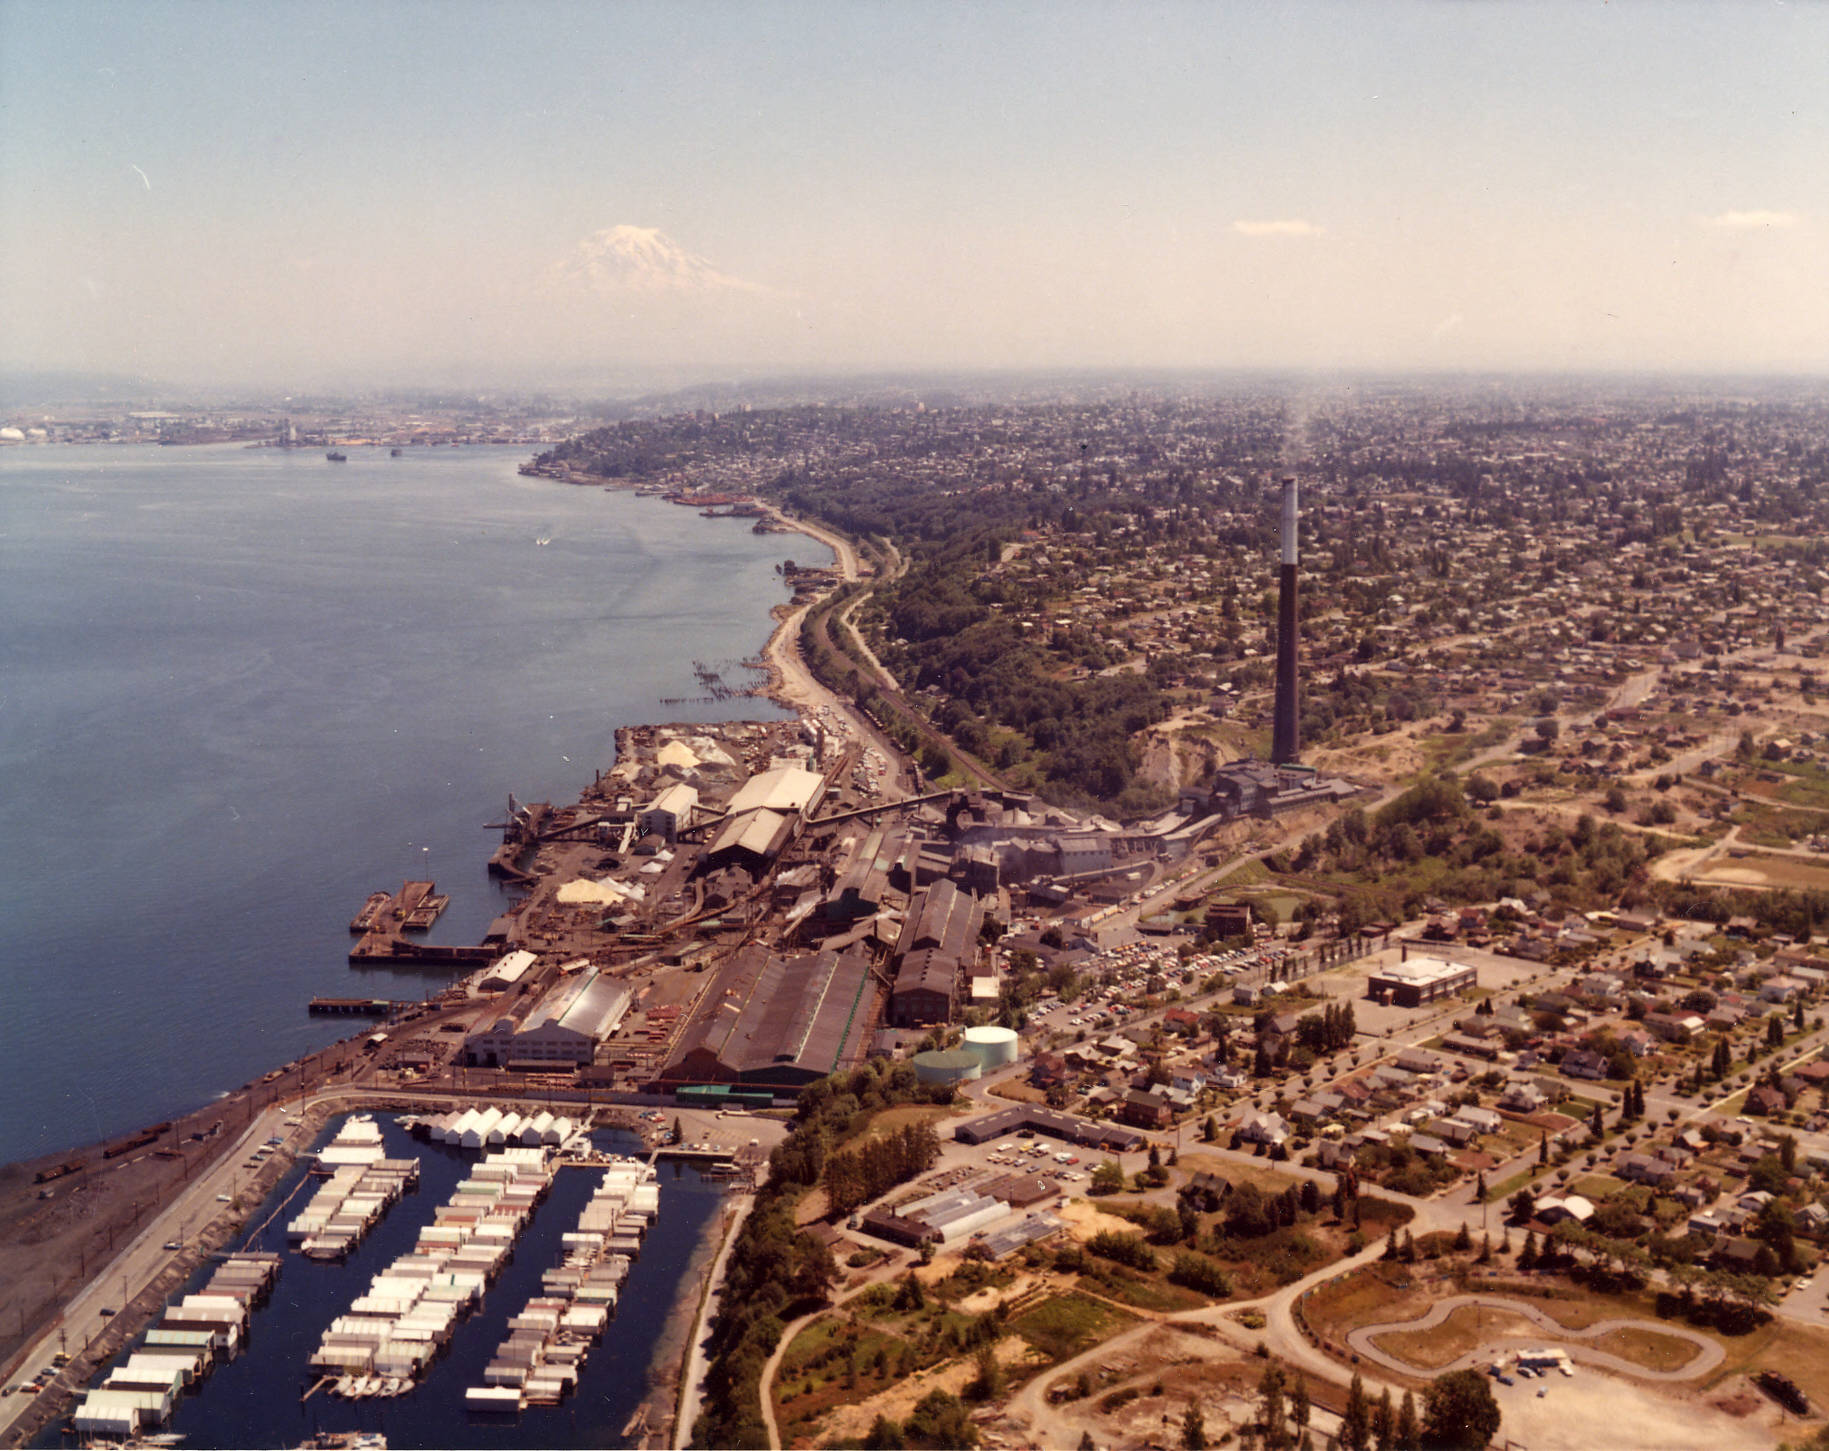 An image of the ASARCO smelter in Tacoma, showing the smokestack rising above the waterfront. Photo credit Tacoma Public Library.